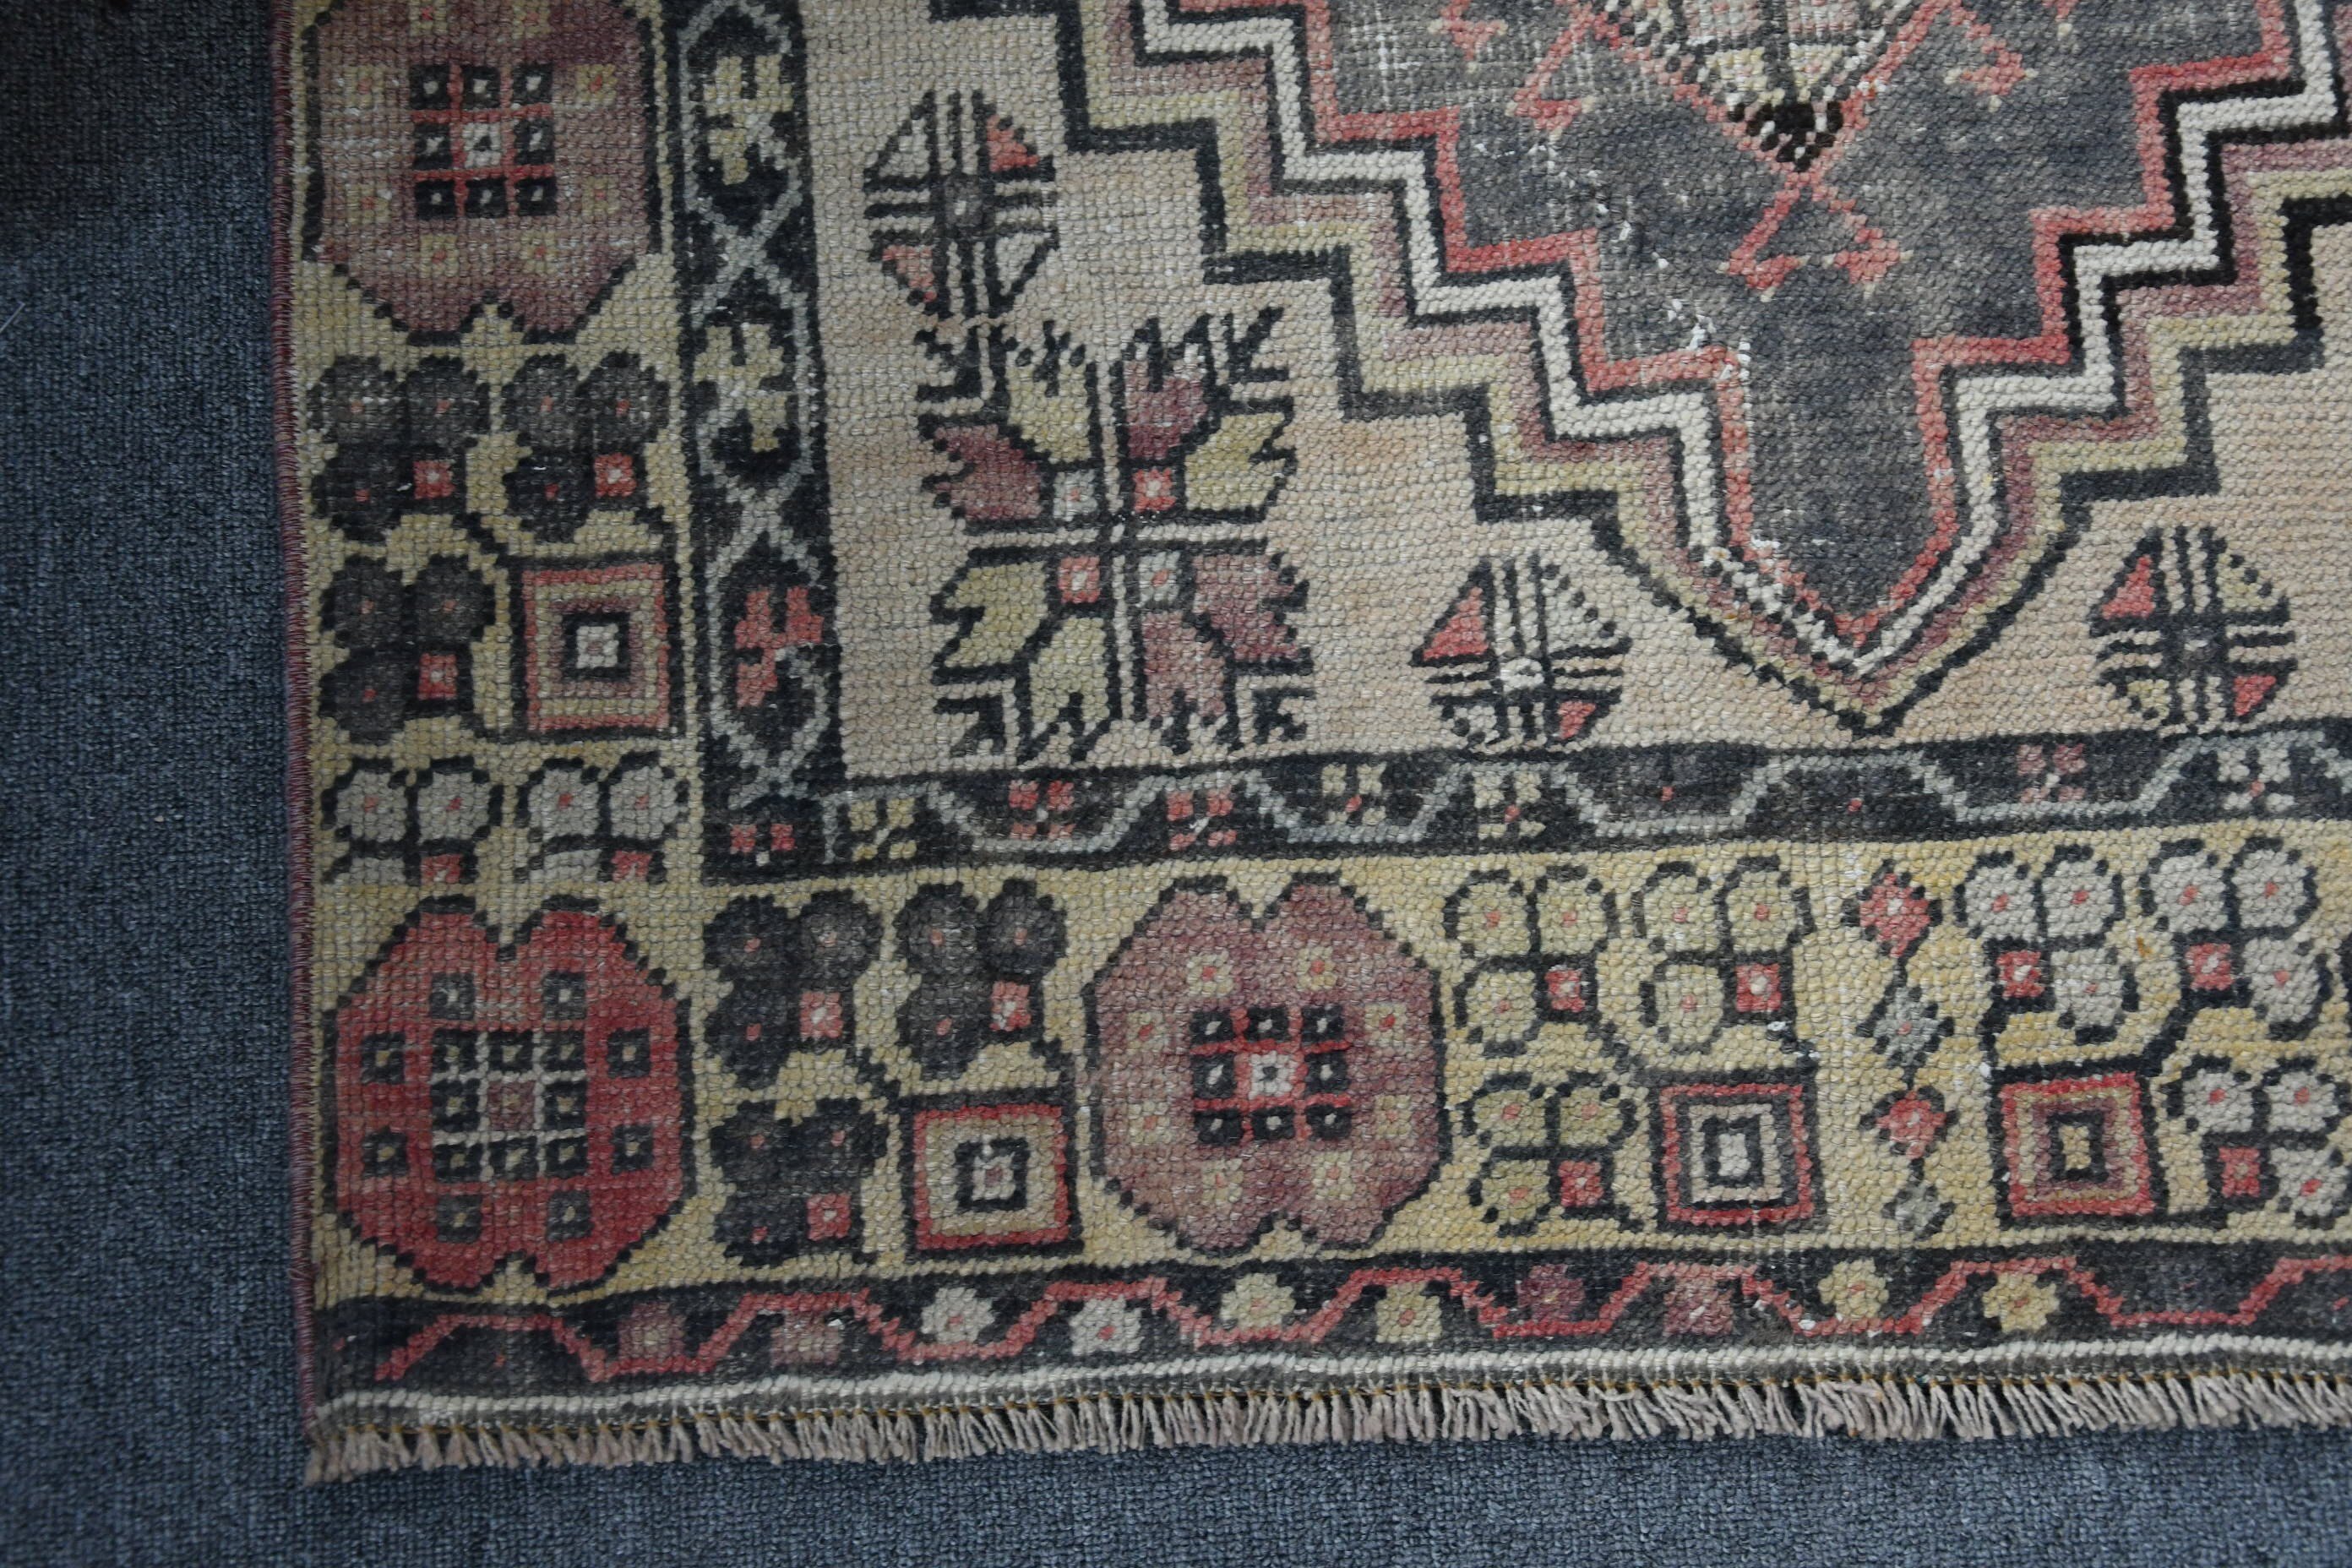 Vintage Rugs, Muted Rugs, 3.1x5.6 ft Accent Rug, Antique Rugs, Kitchen Rug, Rugs for Nursery, Entryway Rug Rugs, Entry Rug, Turkish Rug